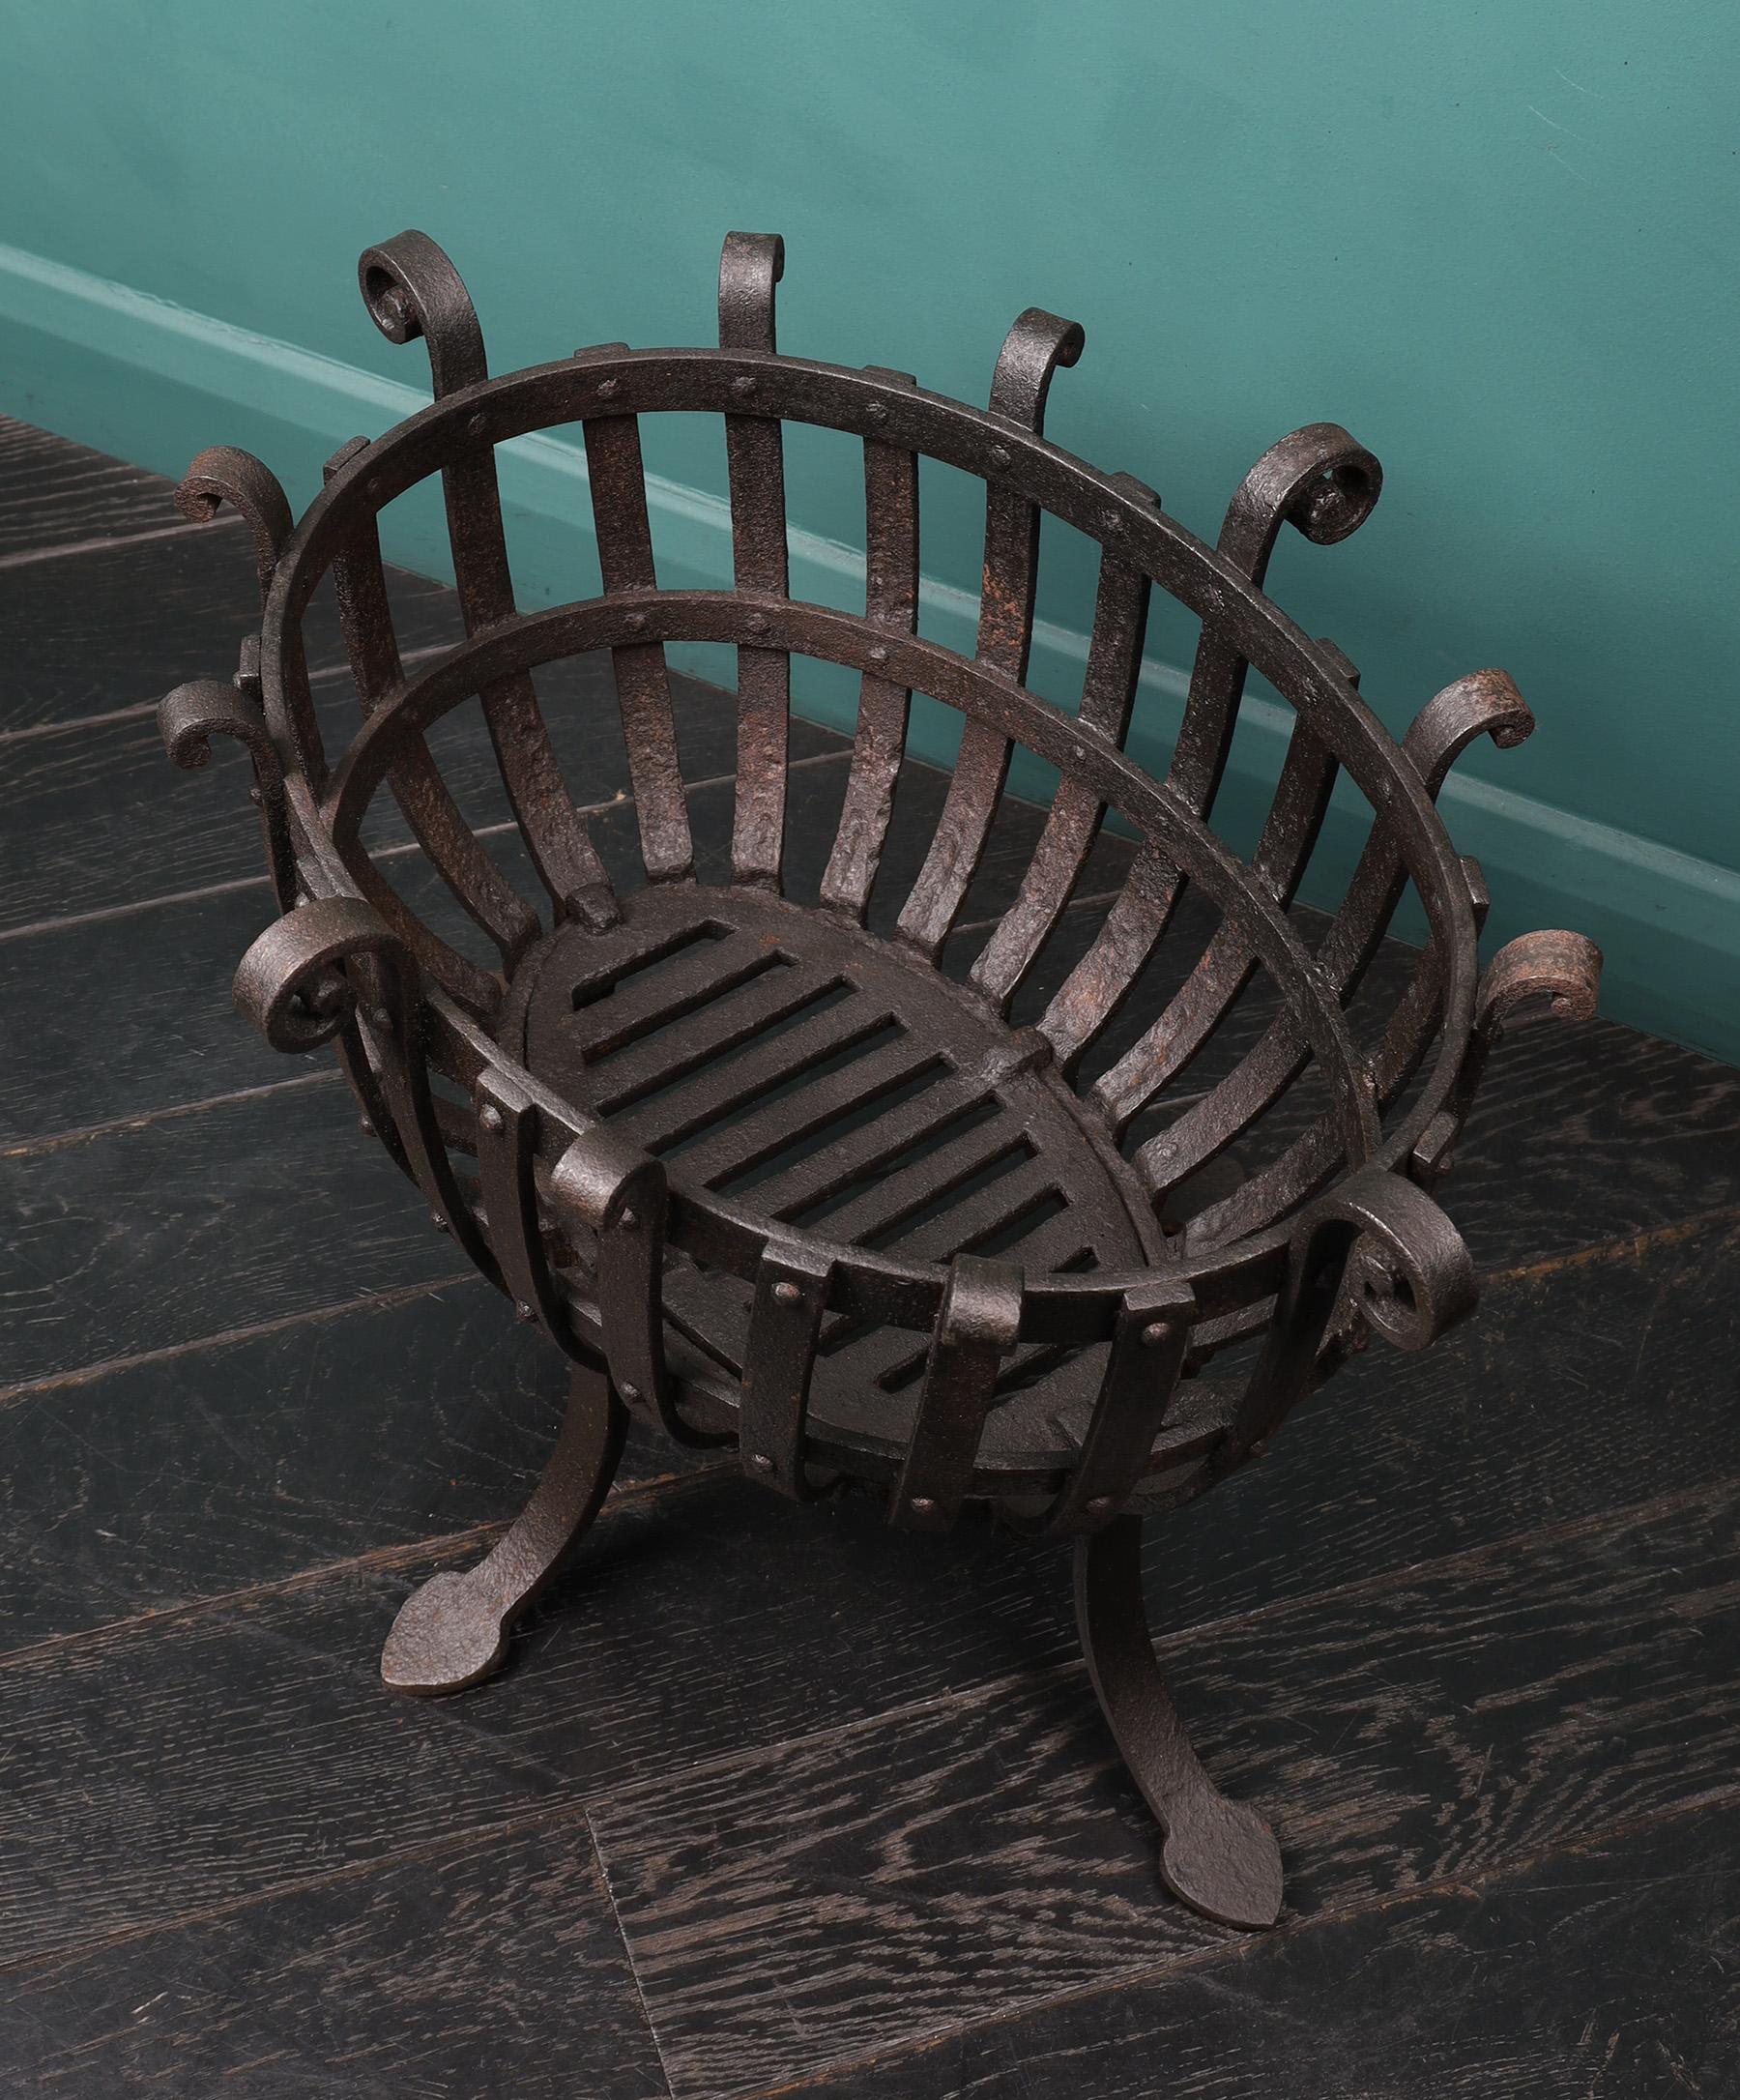 An oval wrought fireplace fire basket brazier. The blacksmith-made fire basket of rivet-work construction with scroll finials supported on spear feet. Perfect for a garden brazier. Wax finish.
Height of burning area: 6″
Circa 19th century